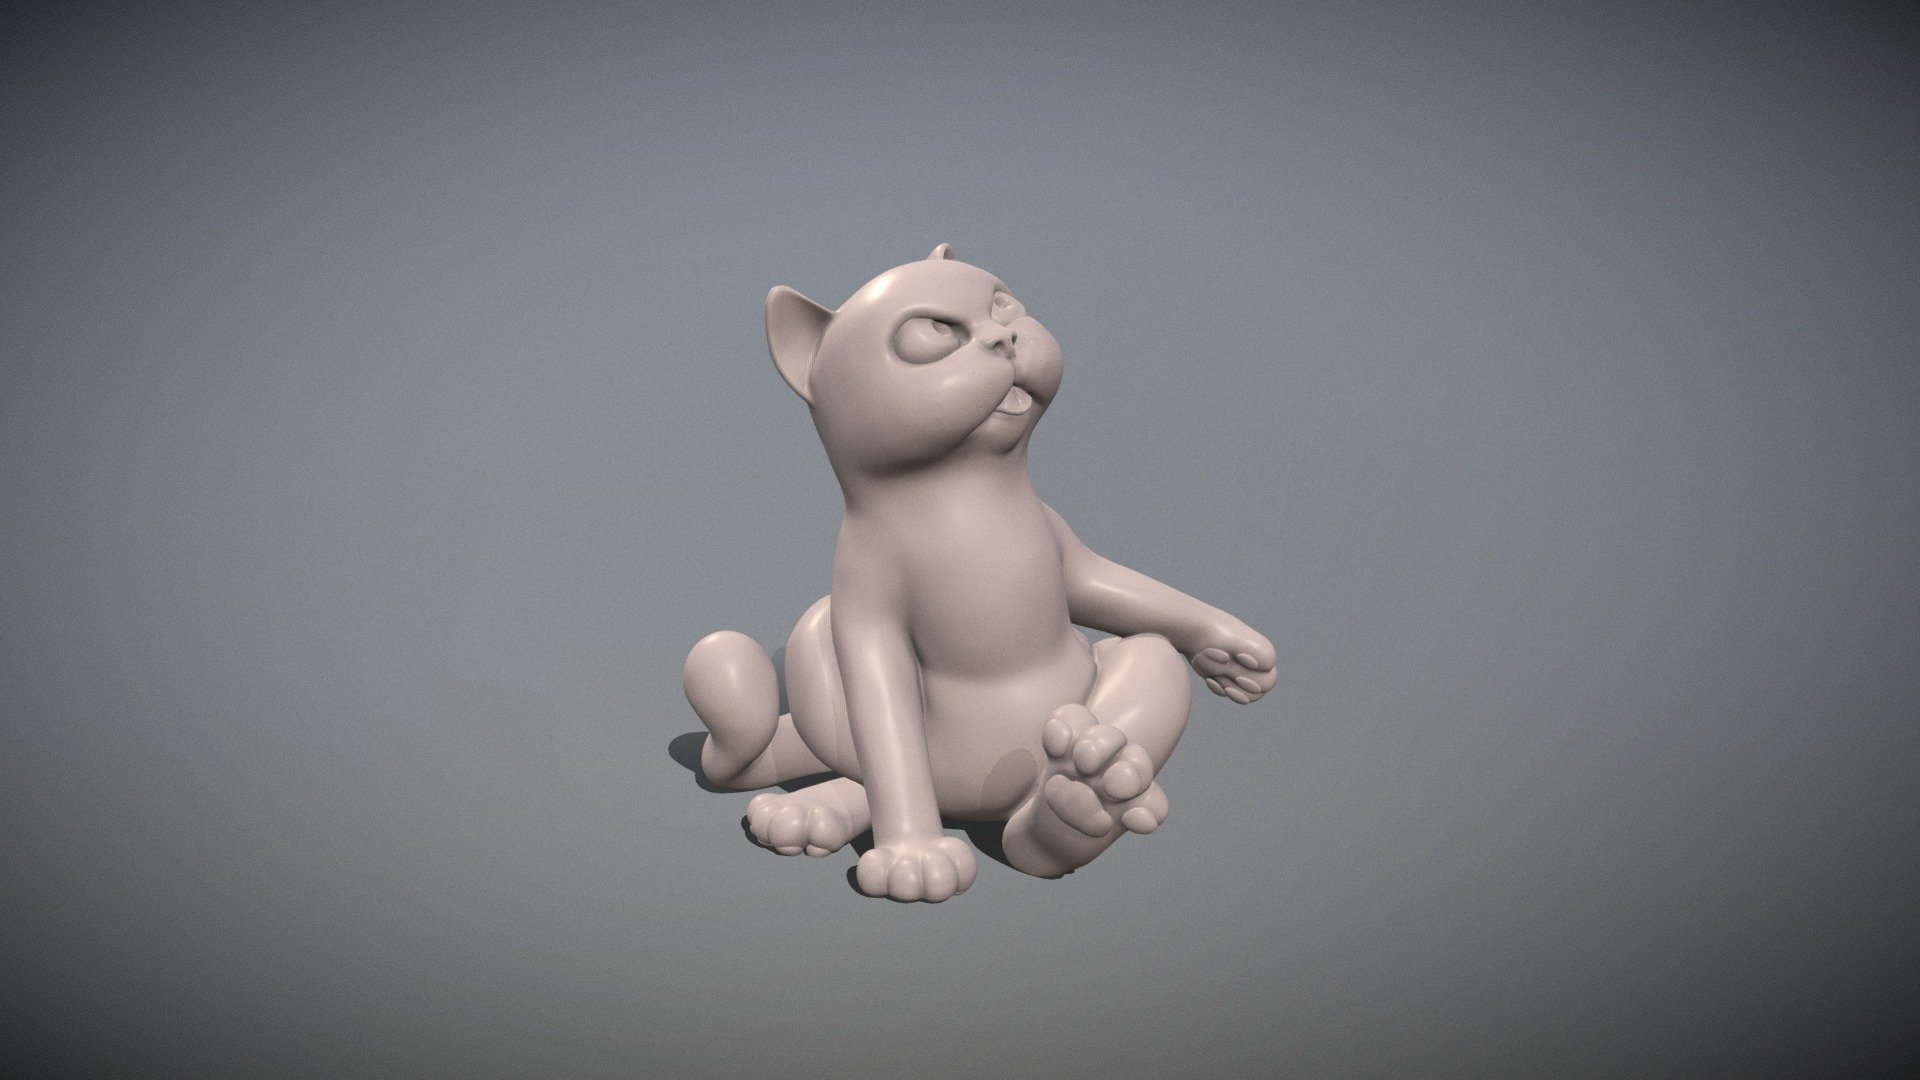 cat for 3d printing.
this is printready funny and angry chubby cat who has just licked his testicles with his hind paw raised, distracted and looks indignantly, forgetting to hide his tongue 3d model